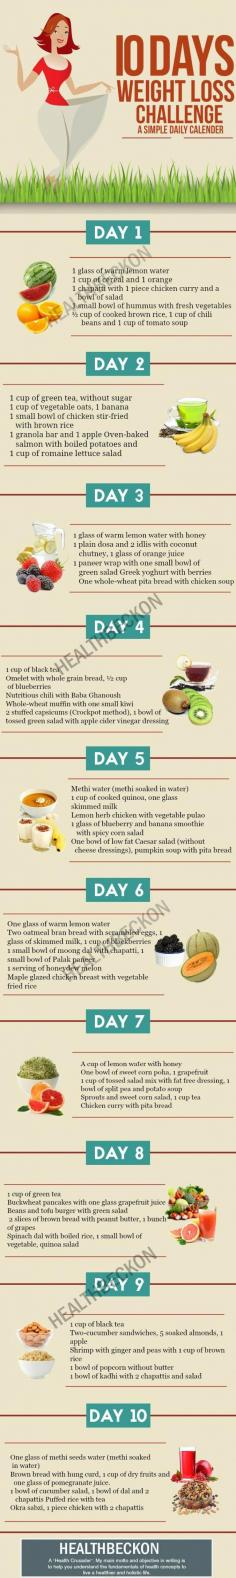 If you too are looking for ways to lose weight and live a healthier life, you have come to the right place! The following tips can help you shed a few pounds, and that too in just 10 days! Weight loss motivation and great weight loss tips here - www.topeffectivediets.ml